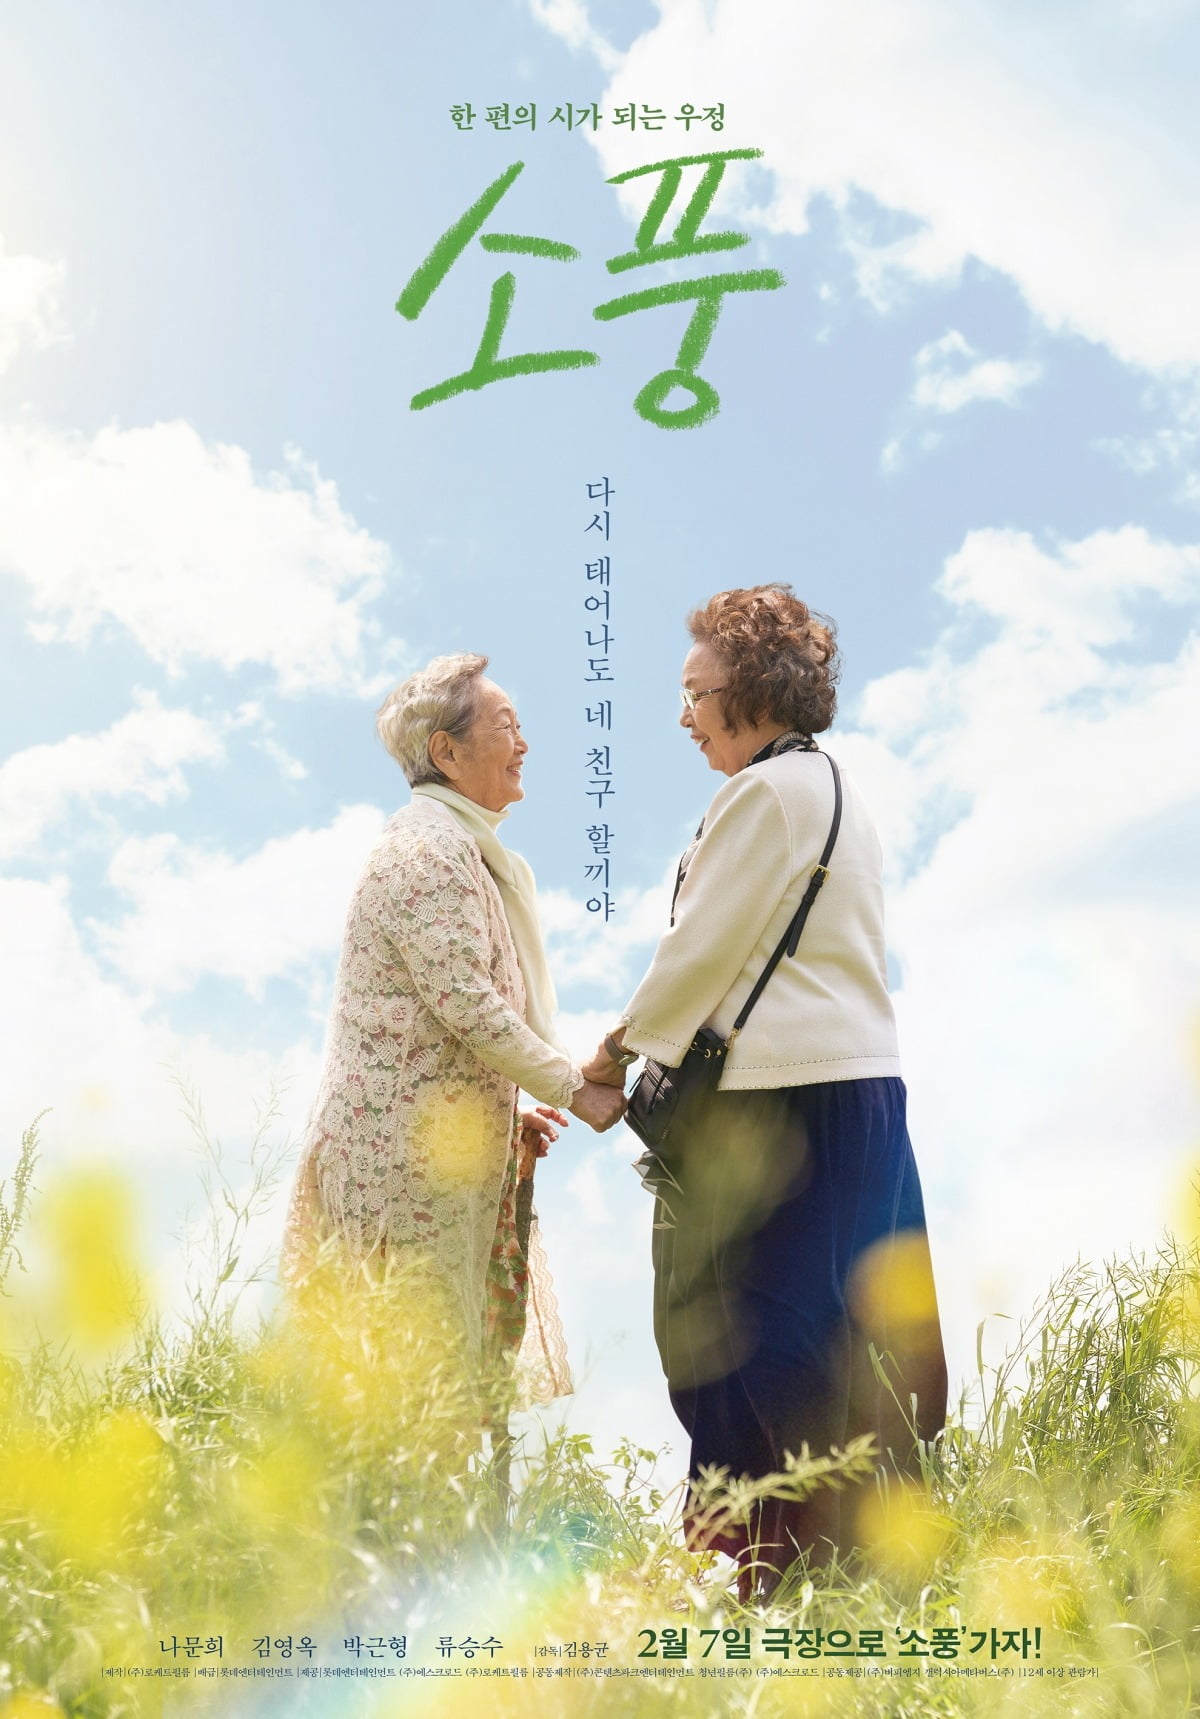 'Picnic' Kim Young-ok × Na Moon-hee "Even if we are reborn, we will still be friends"